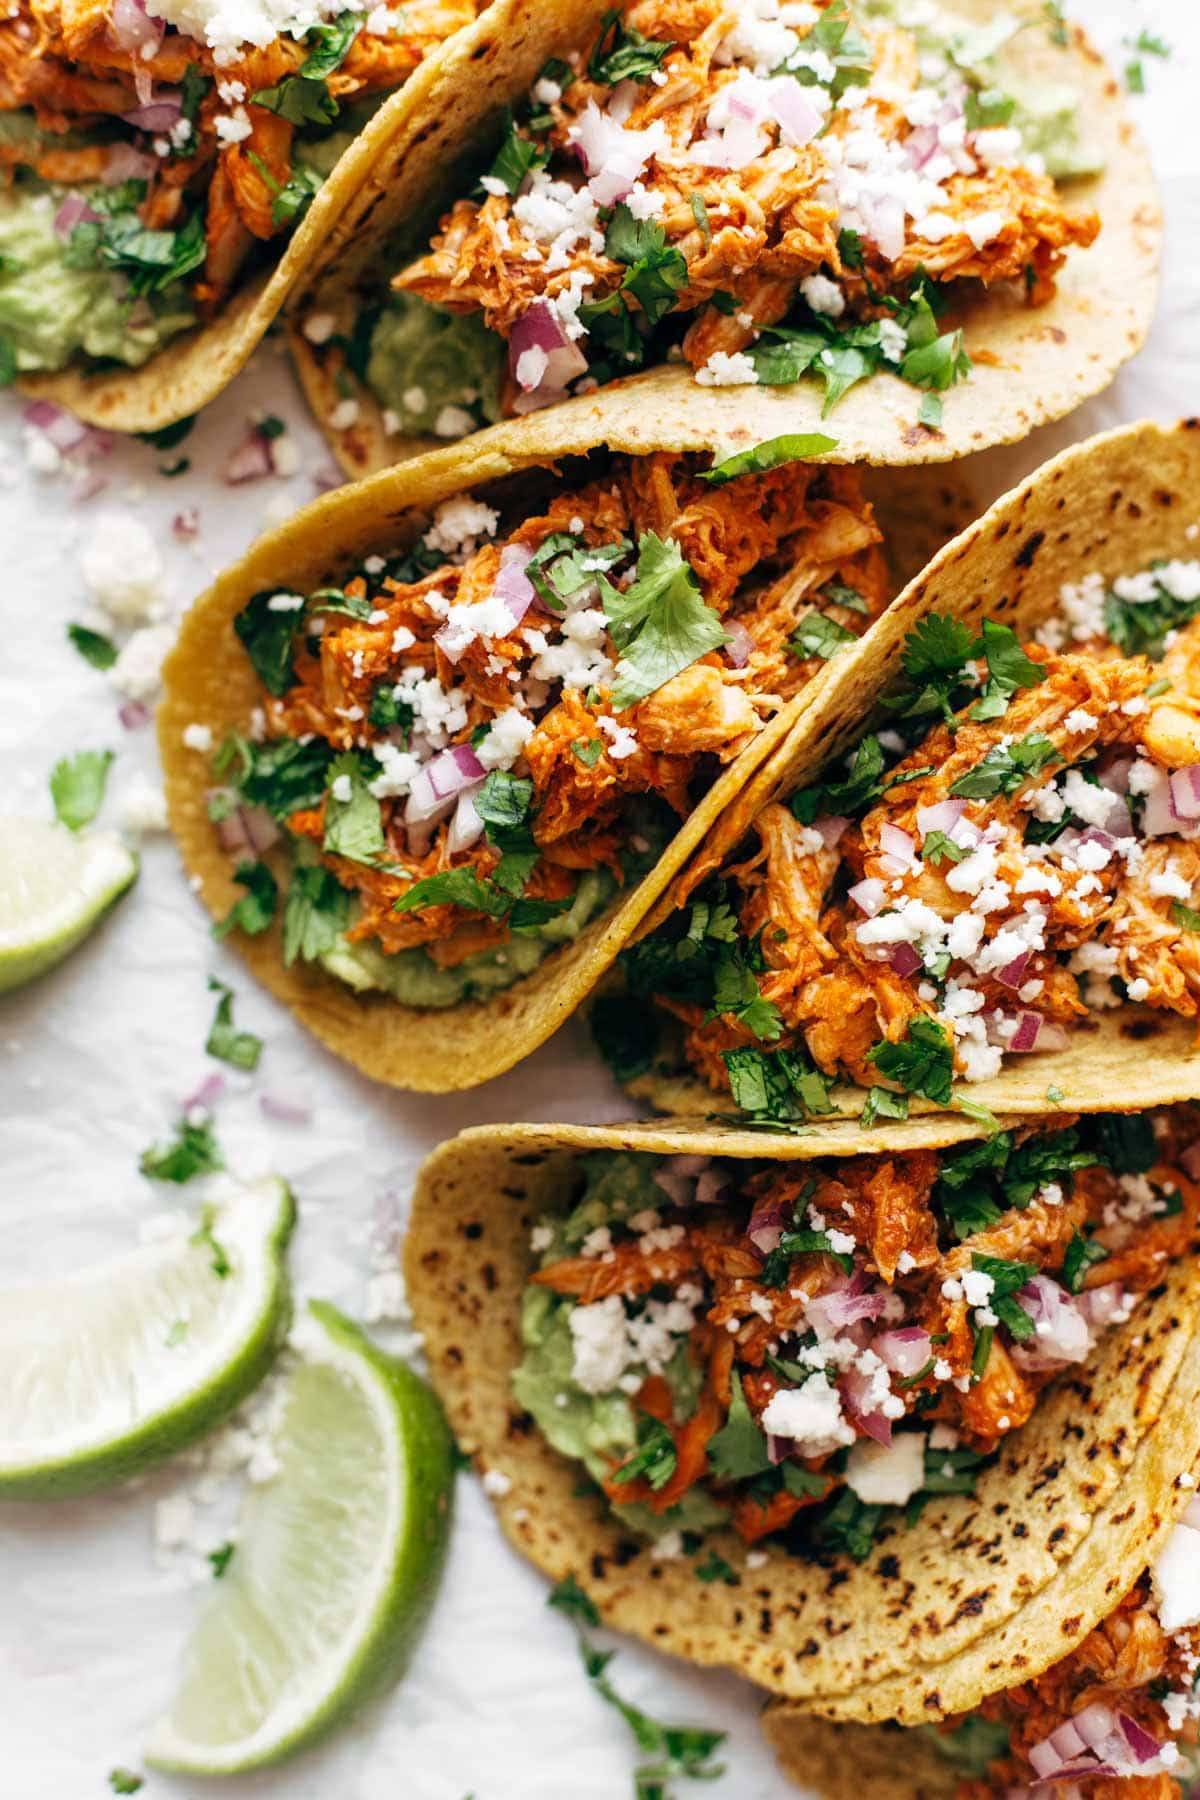 Tacos with chicken tinga and onion.